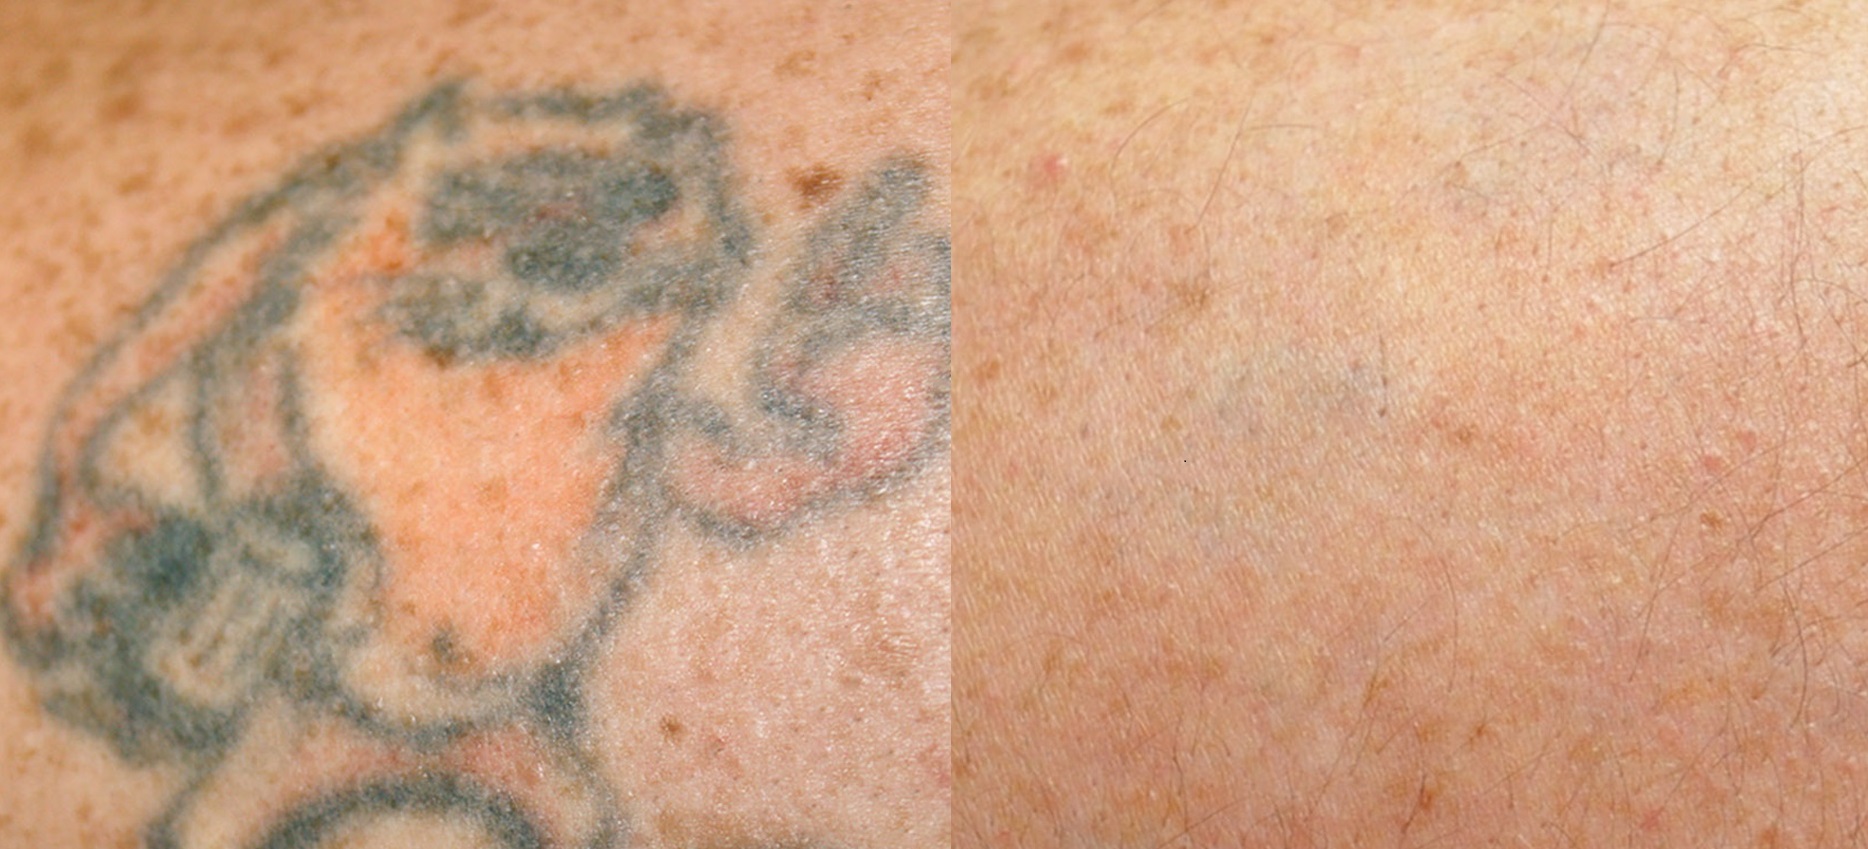 Aesthetic Clinic Fillers Sculptra Nad Iv Iv Drips Tattoo Removal